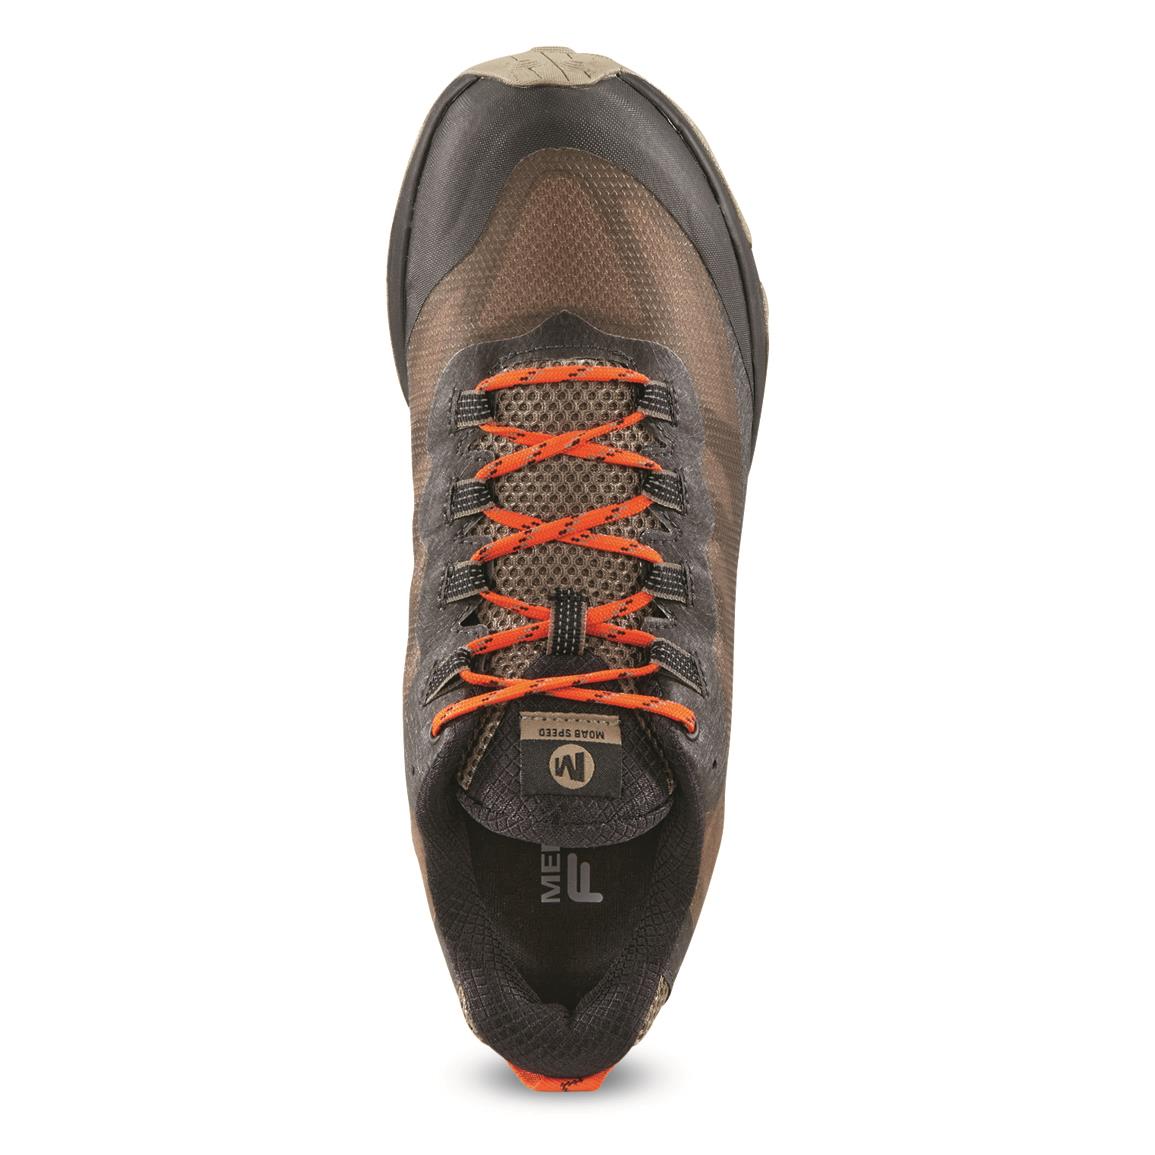 Merrell Padded Hiking Boots | Sportsman's Guide